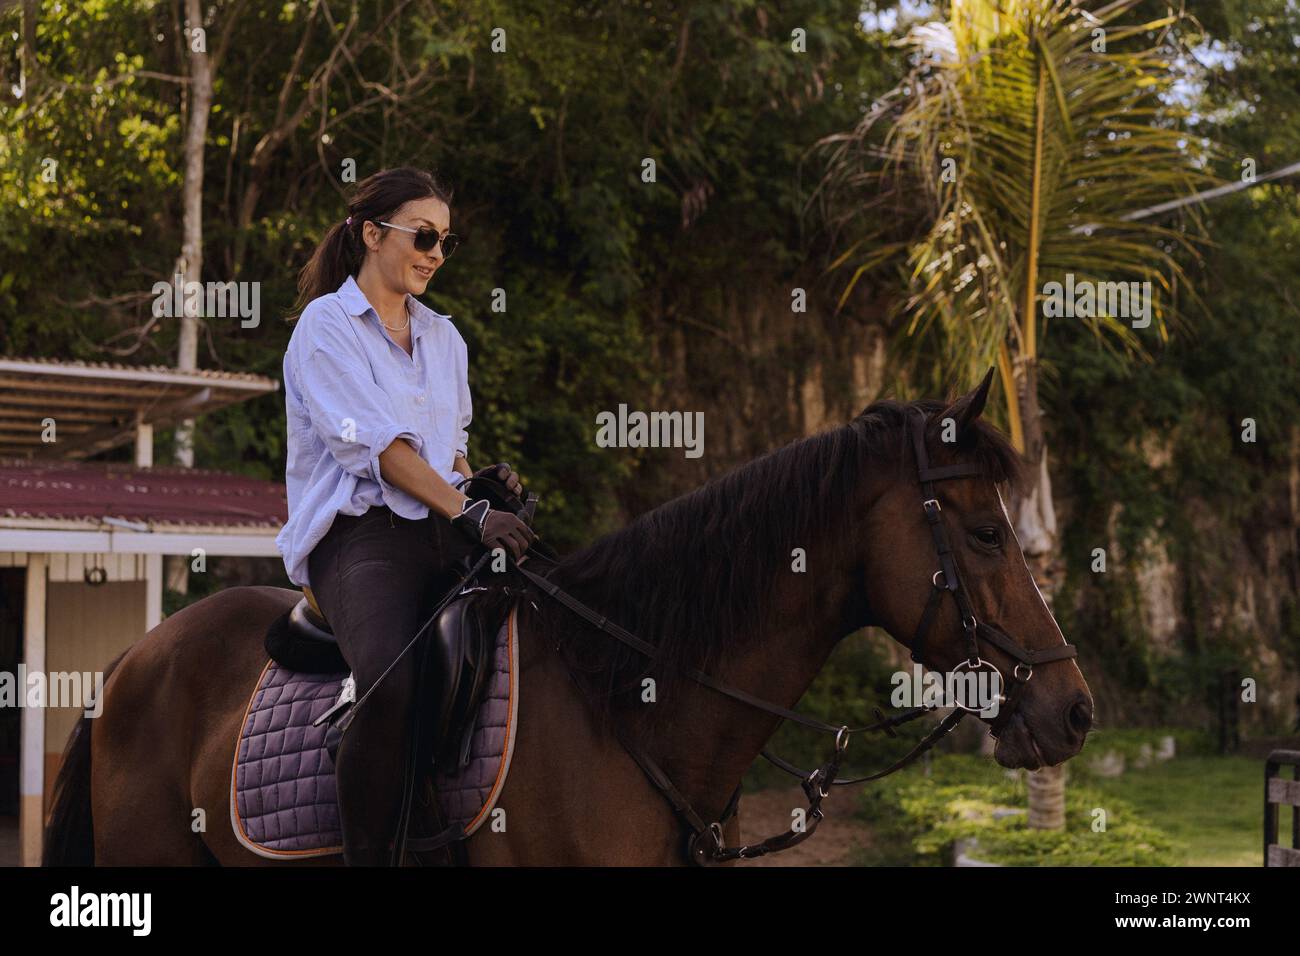 Young woman riding a horse at a riding school. Stock Photo